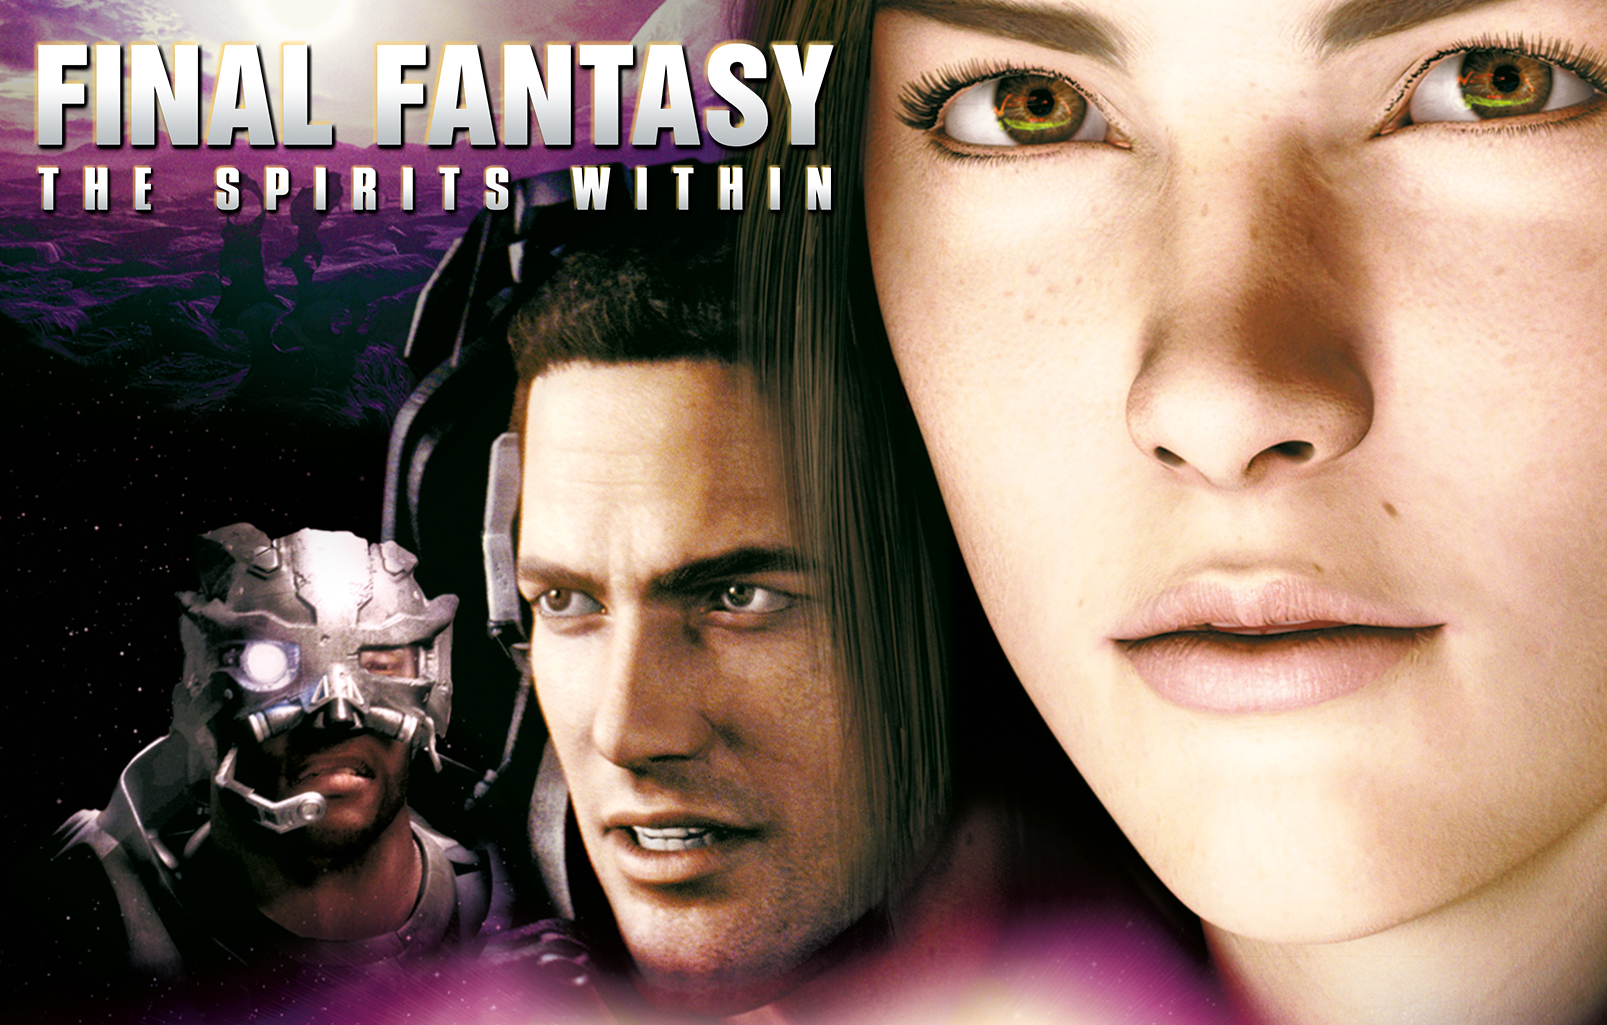 Rotten Tomatoes Facts - final fantasy spirits within - Final Fantasy The Spirits Within